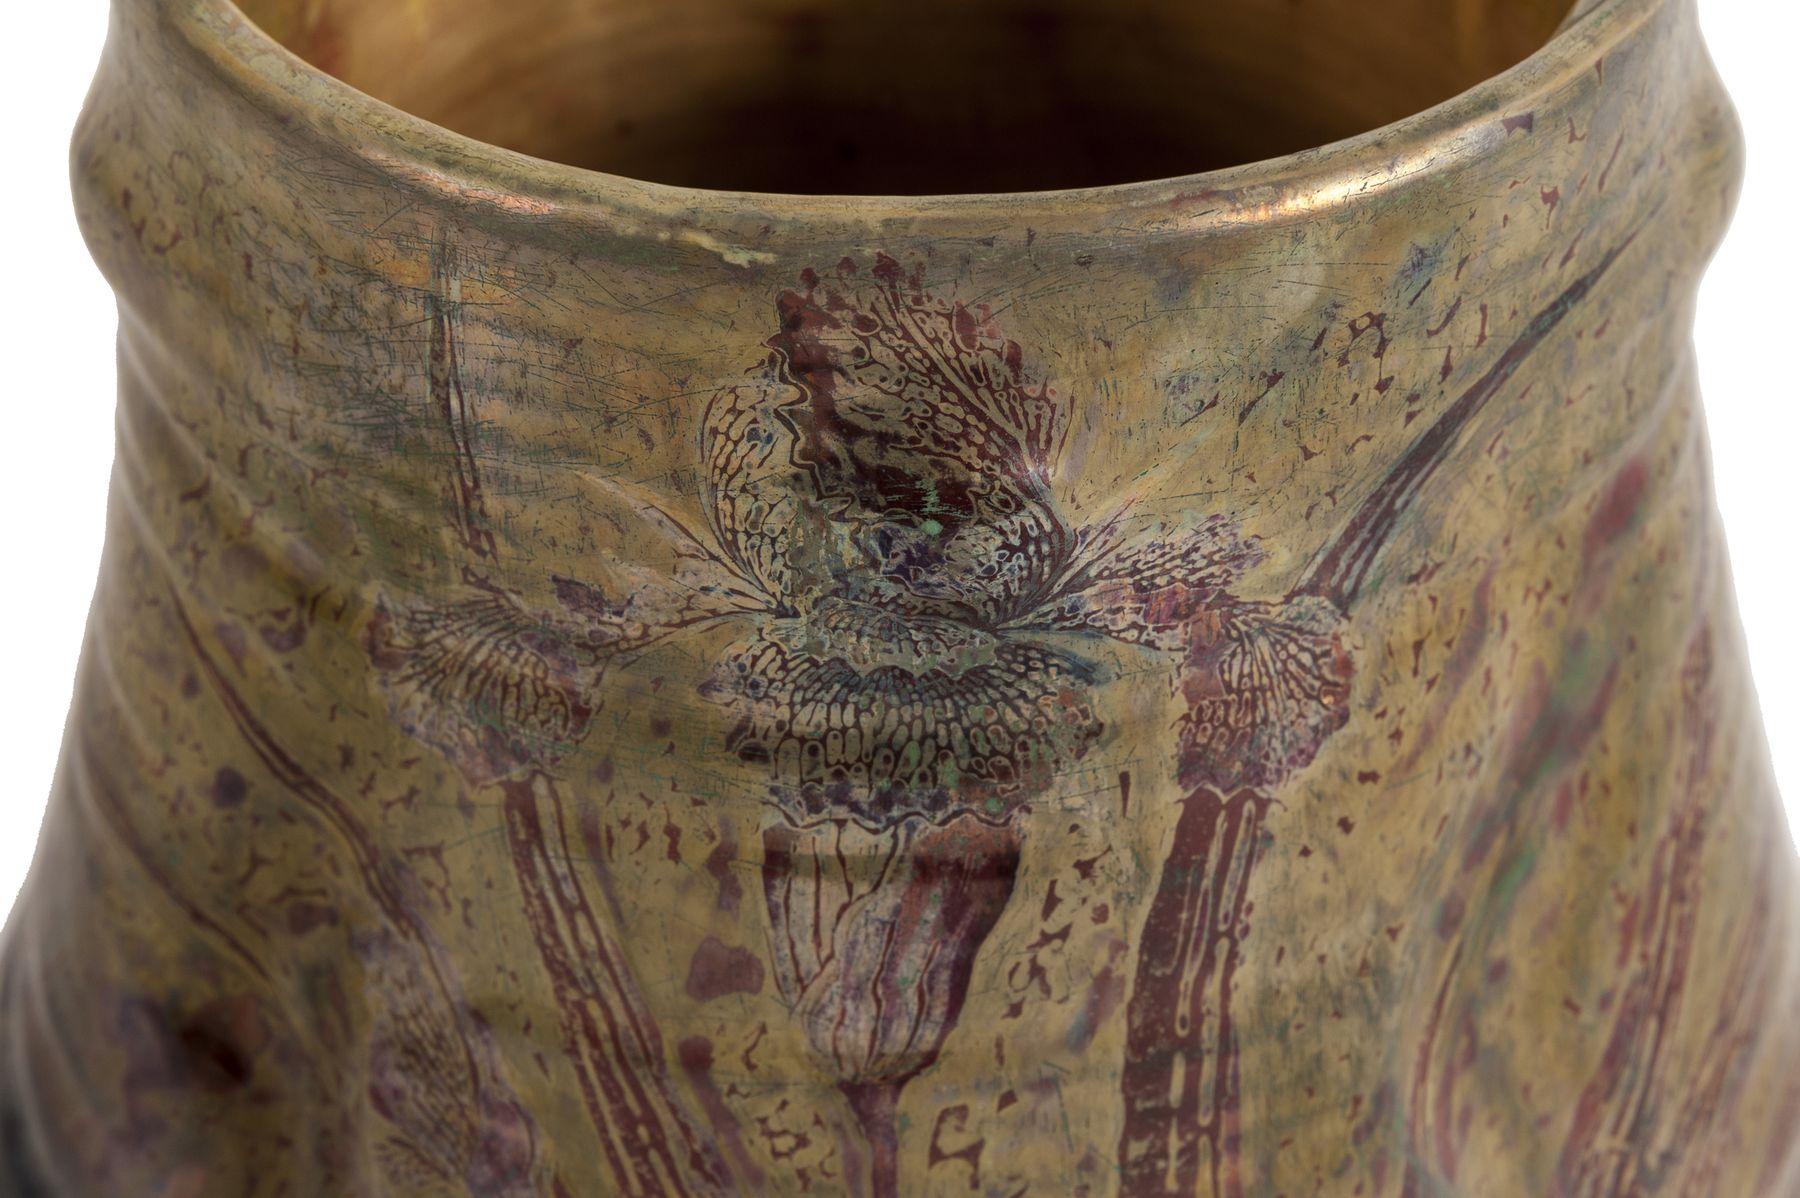 Sébastien Keller et Guérin
Planter decorated with orchids
Iridescent glazed earthenware
Signed under the basis 